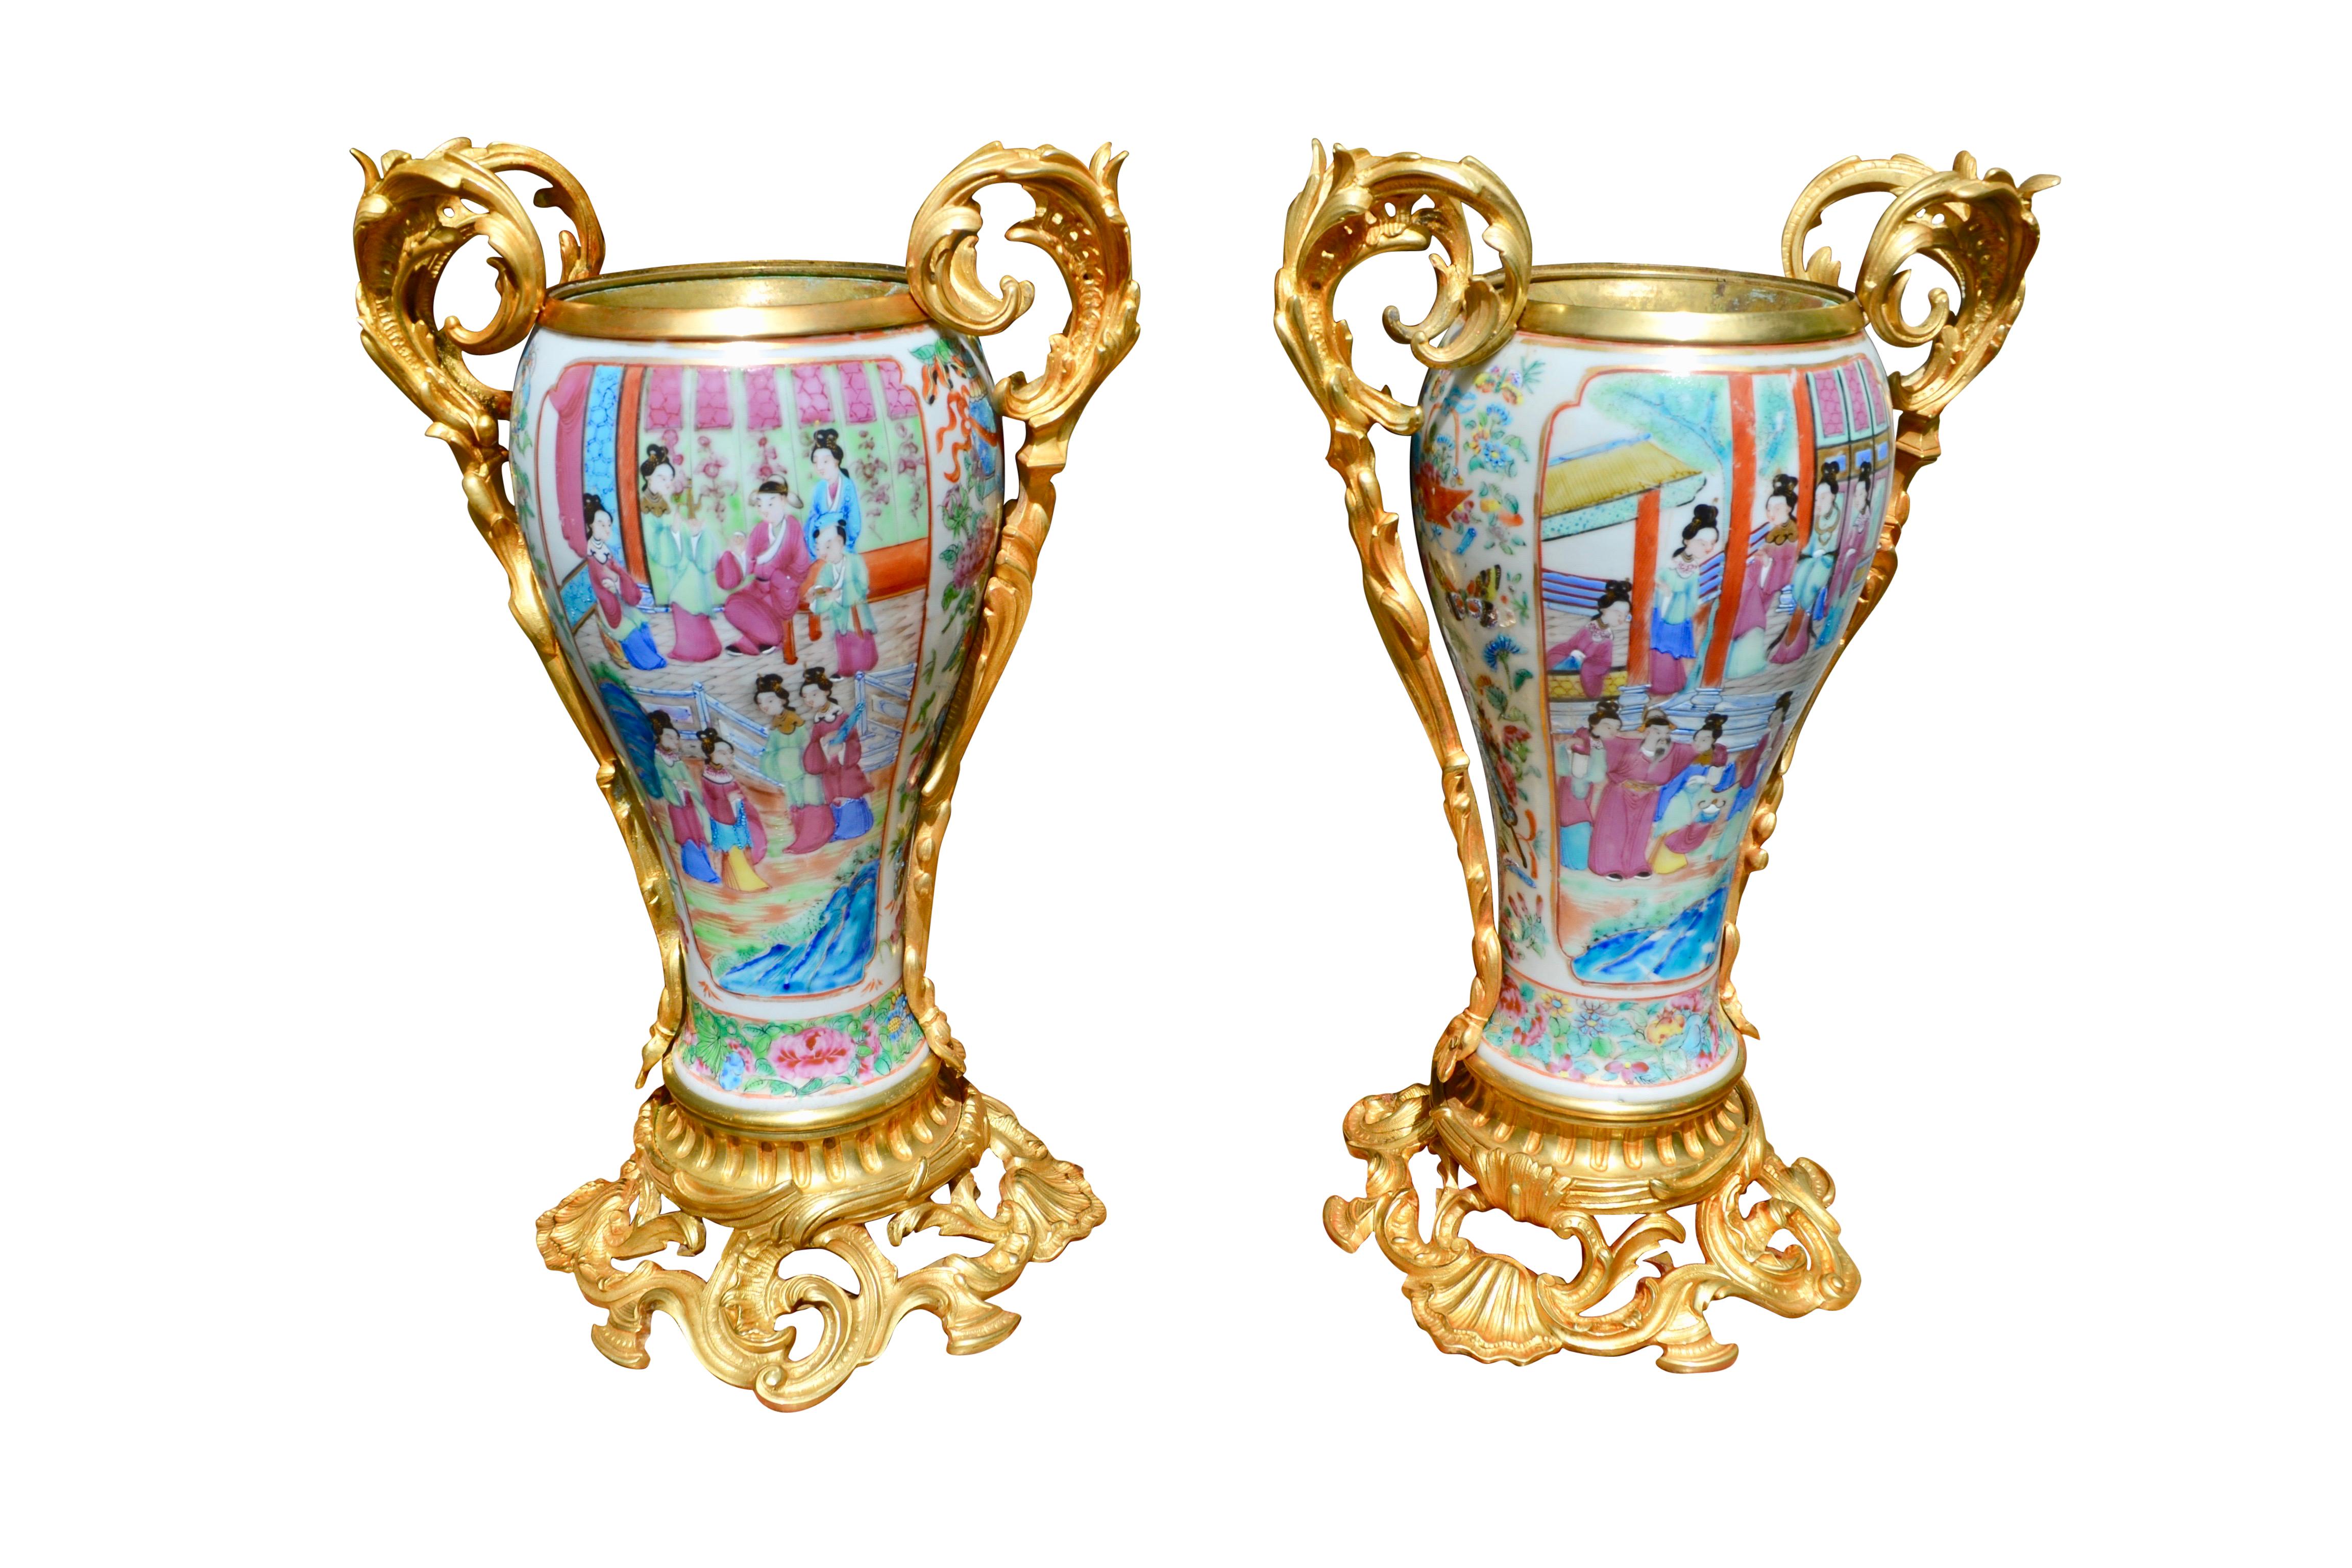 A beautiful French and Asian collaboration of a 19thC pair of Napoleon III Famille Rose porcelain, (from Canton China), and gilt bronze and brass oil lamps that miraculously include the original glass tube shades. The lamps are raised on an elegant